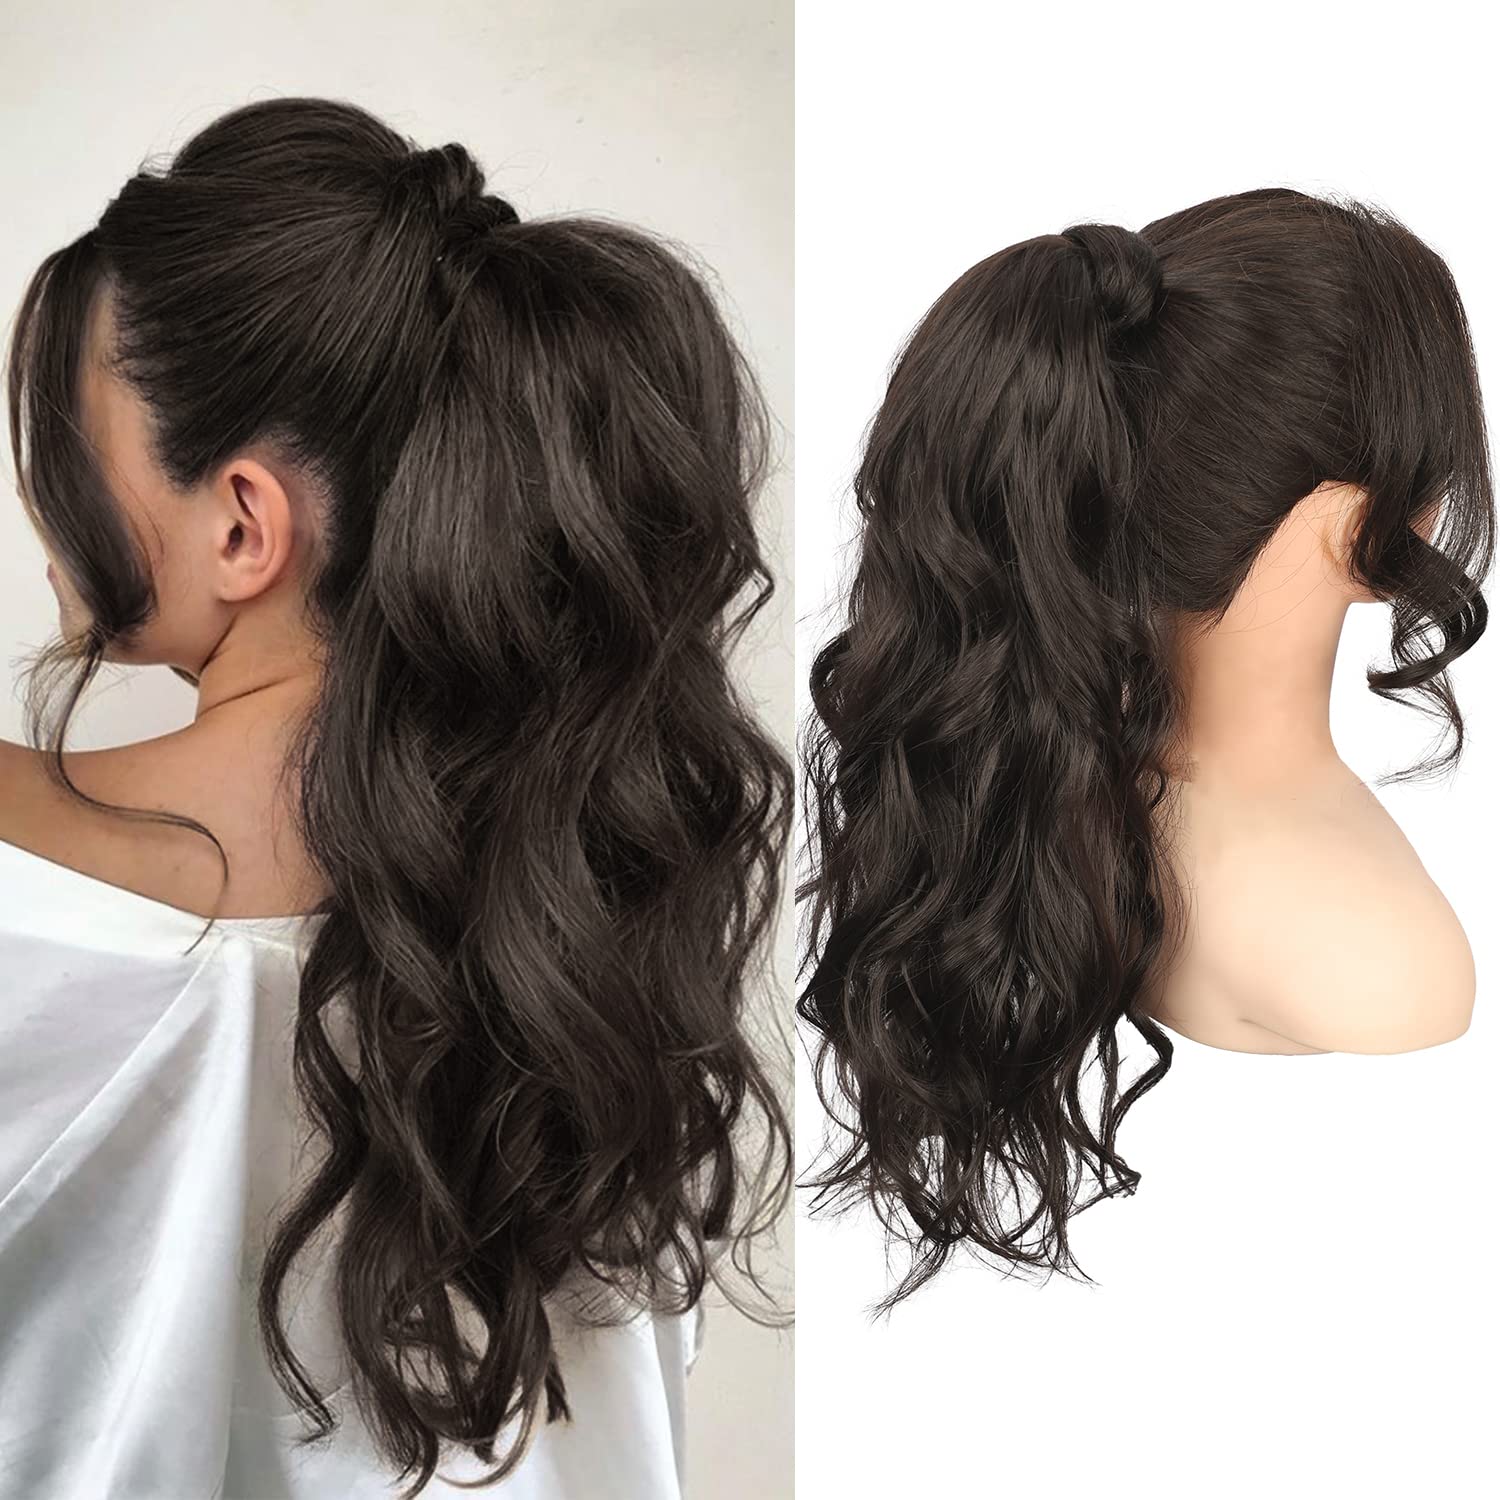 Kinky Curly Brazilian Ponytail Extension With Two Plastic Combs 140g Wrap  Hairpiece For Long Wavy Hair Bun Hairstyles From Divaswigszhou1, $45.77 |  DHgate.Com